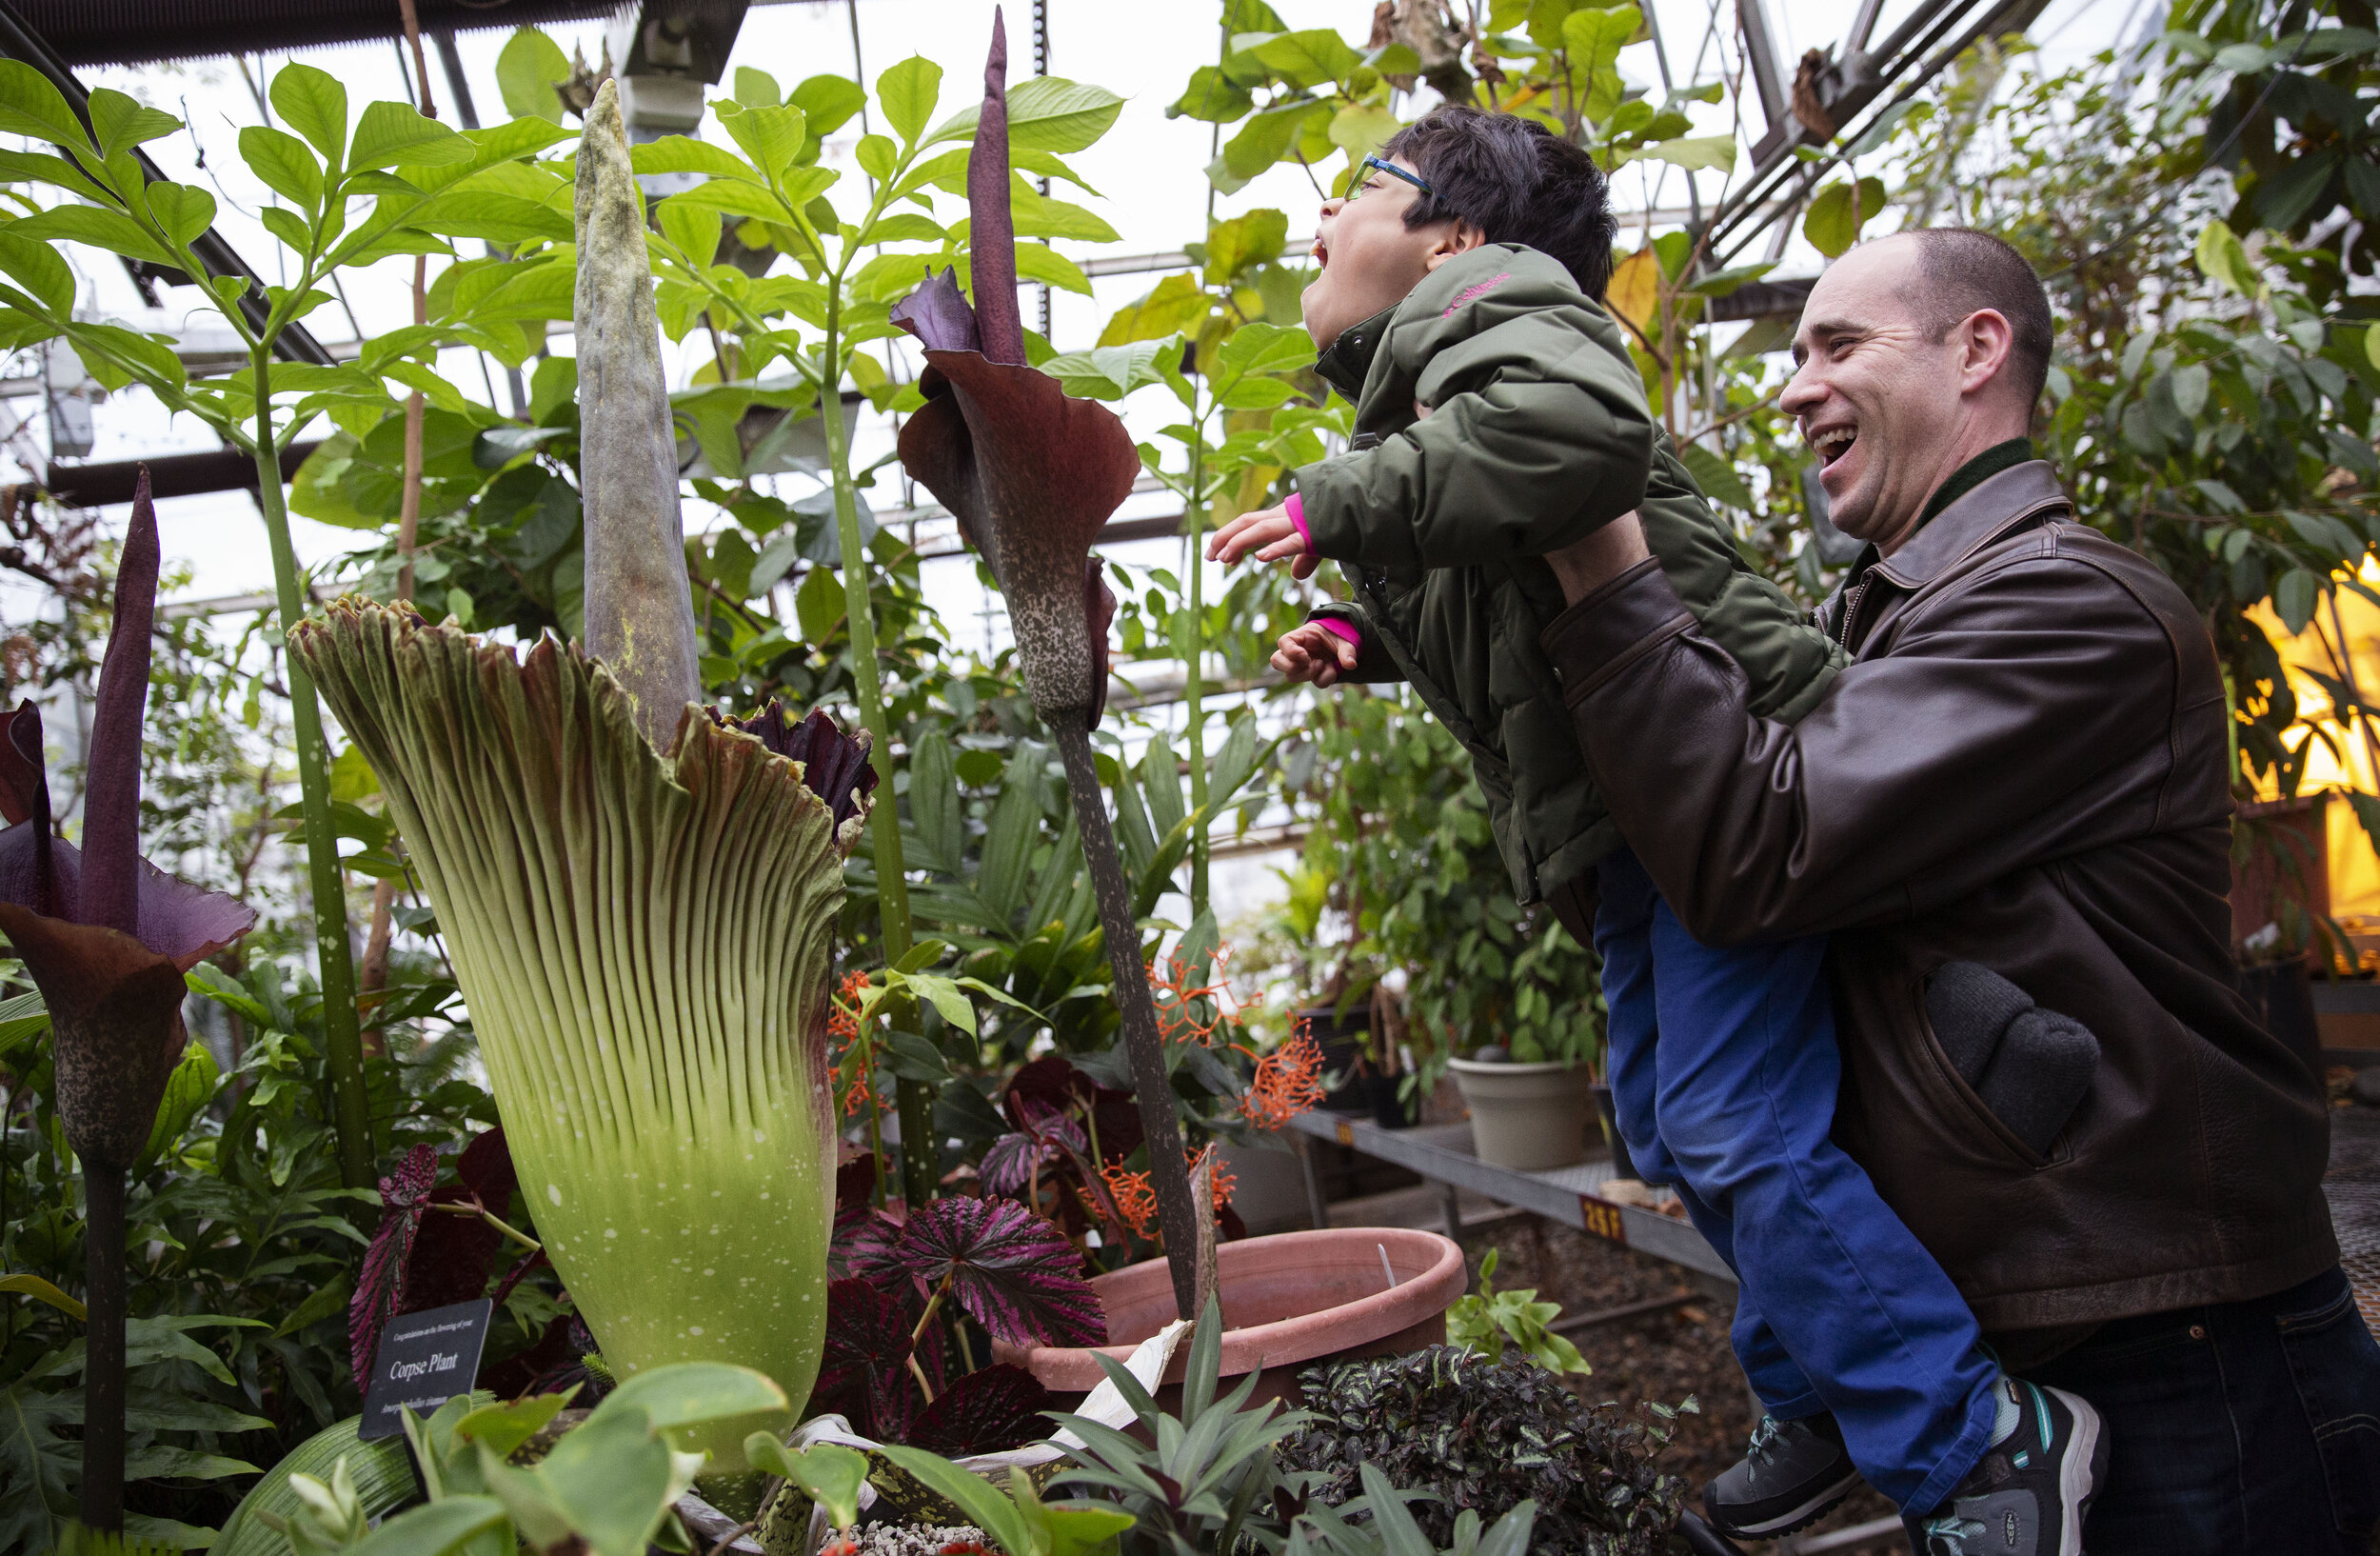  Juan Schlieper reacts to the smell of the corpse flower as his dad, Erich, holds up him to give him an up-close view. Juan compared the flower's smell to fish and said it wasn't as bad as expected. 